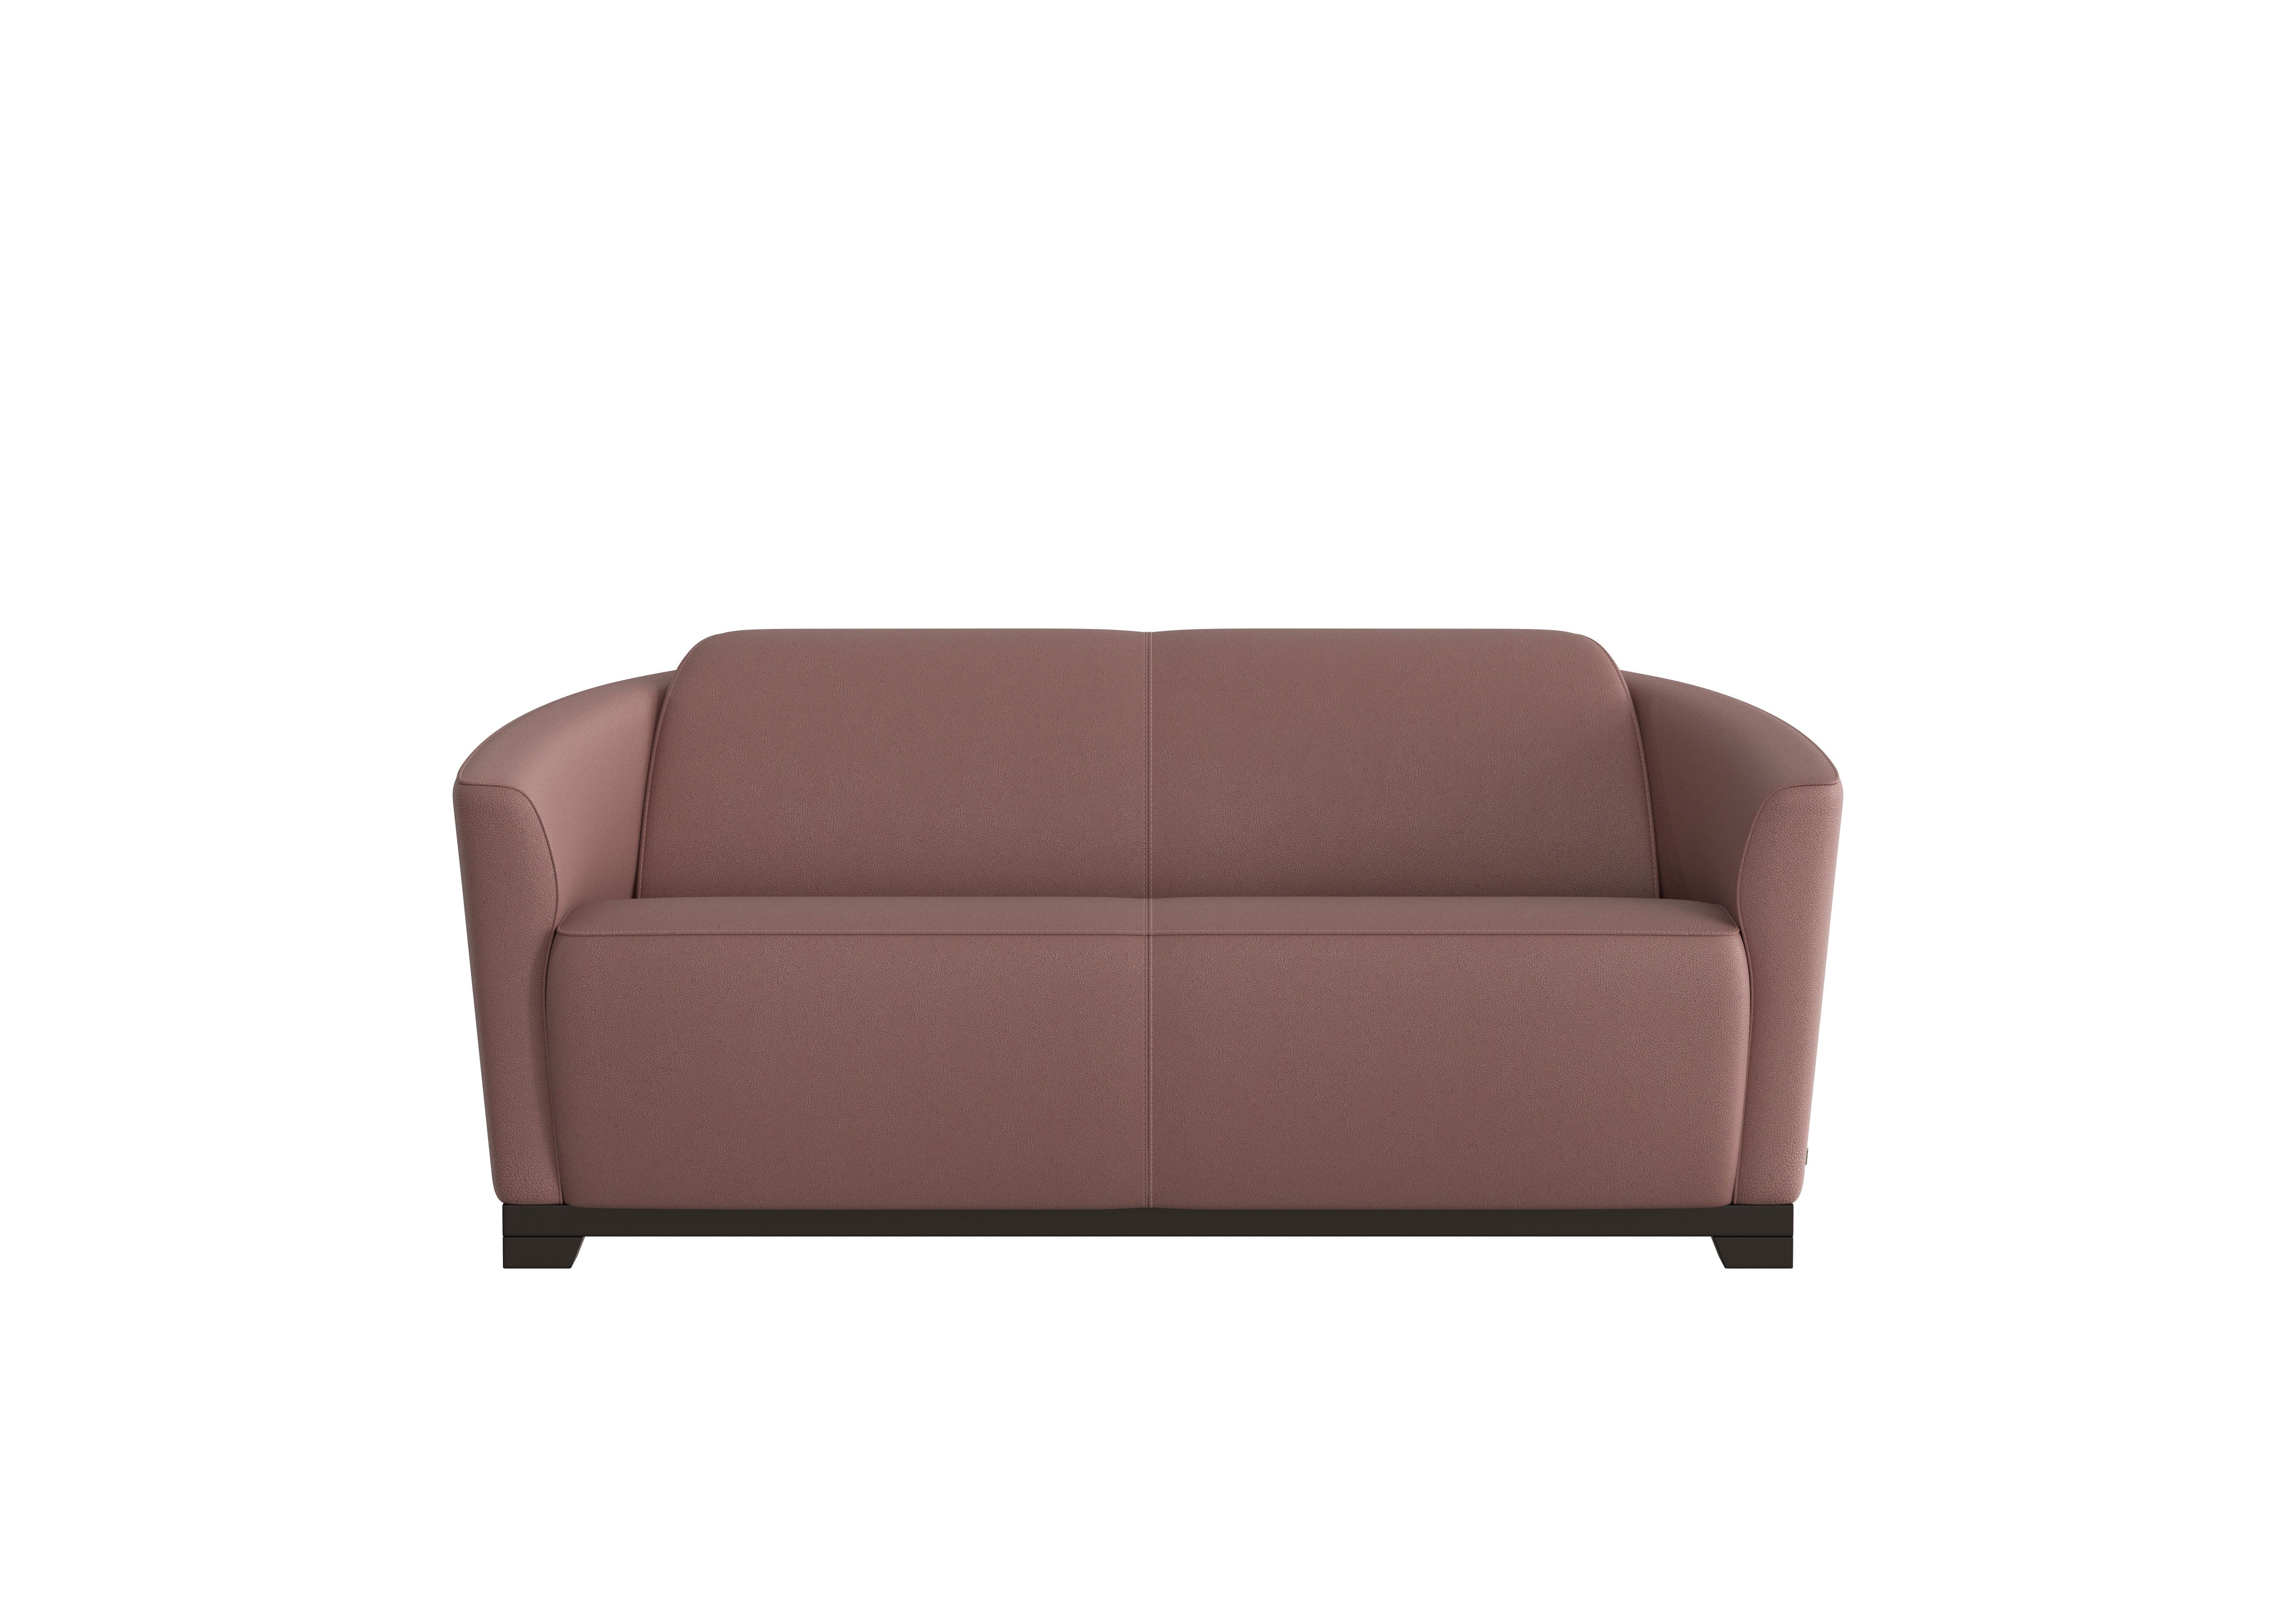 Ketty 2.5 Seater Leather Sofa in Botero Cipria 2160 on Furniture Village